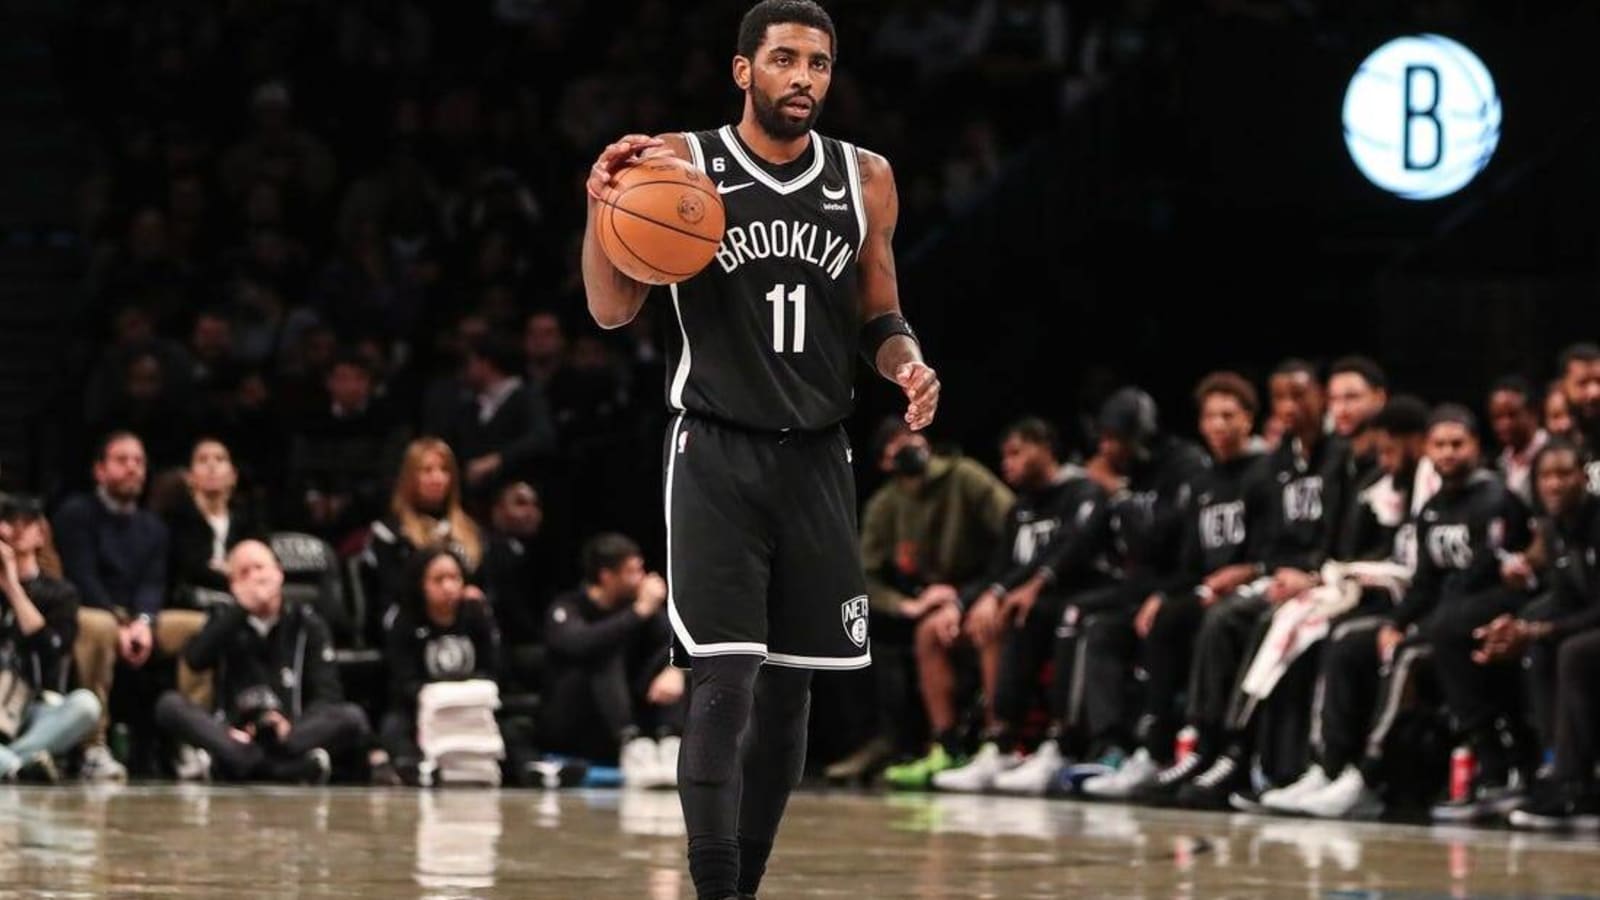 Brooklyn Nets vs. Boston Celtics preview, prediction, pick for 2/1: Nets hope for reinforcements